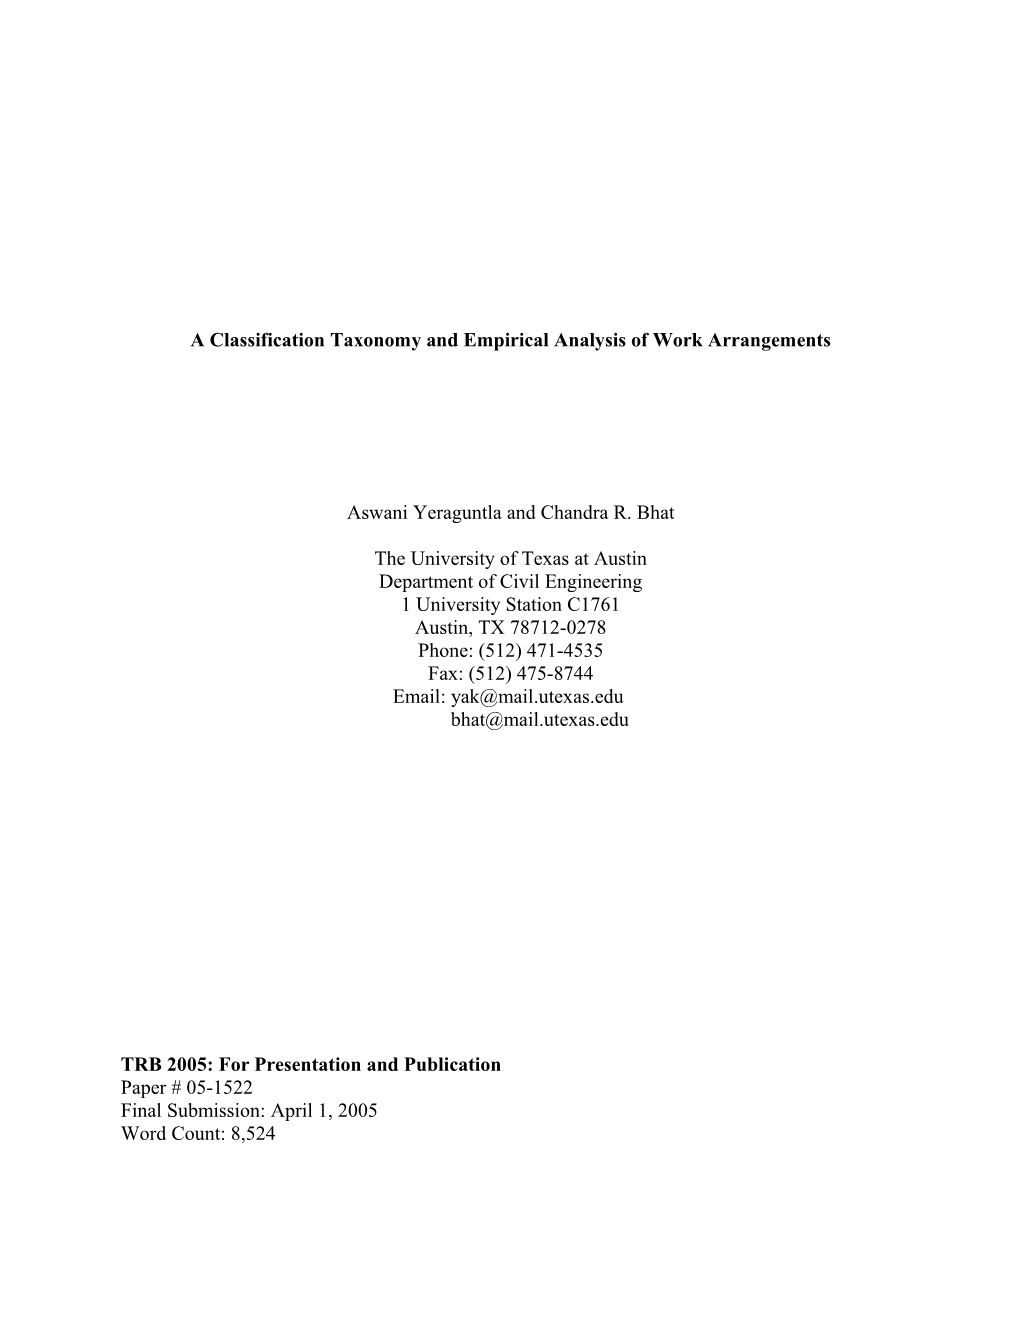 A Classification Taxonomy and Empirical Analysis of Work Arrangements